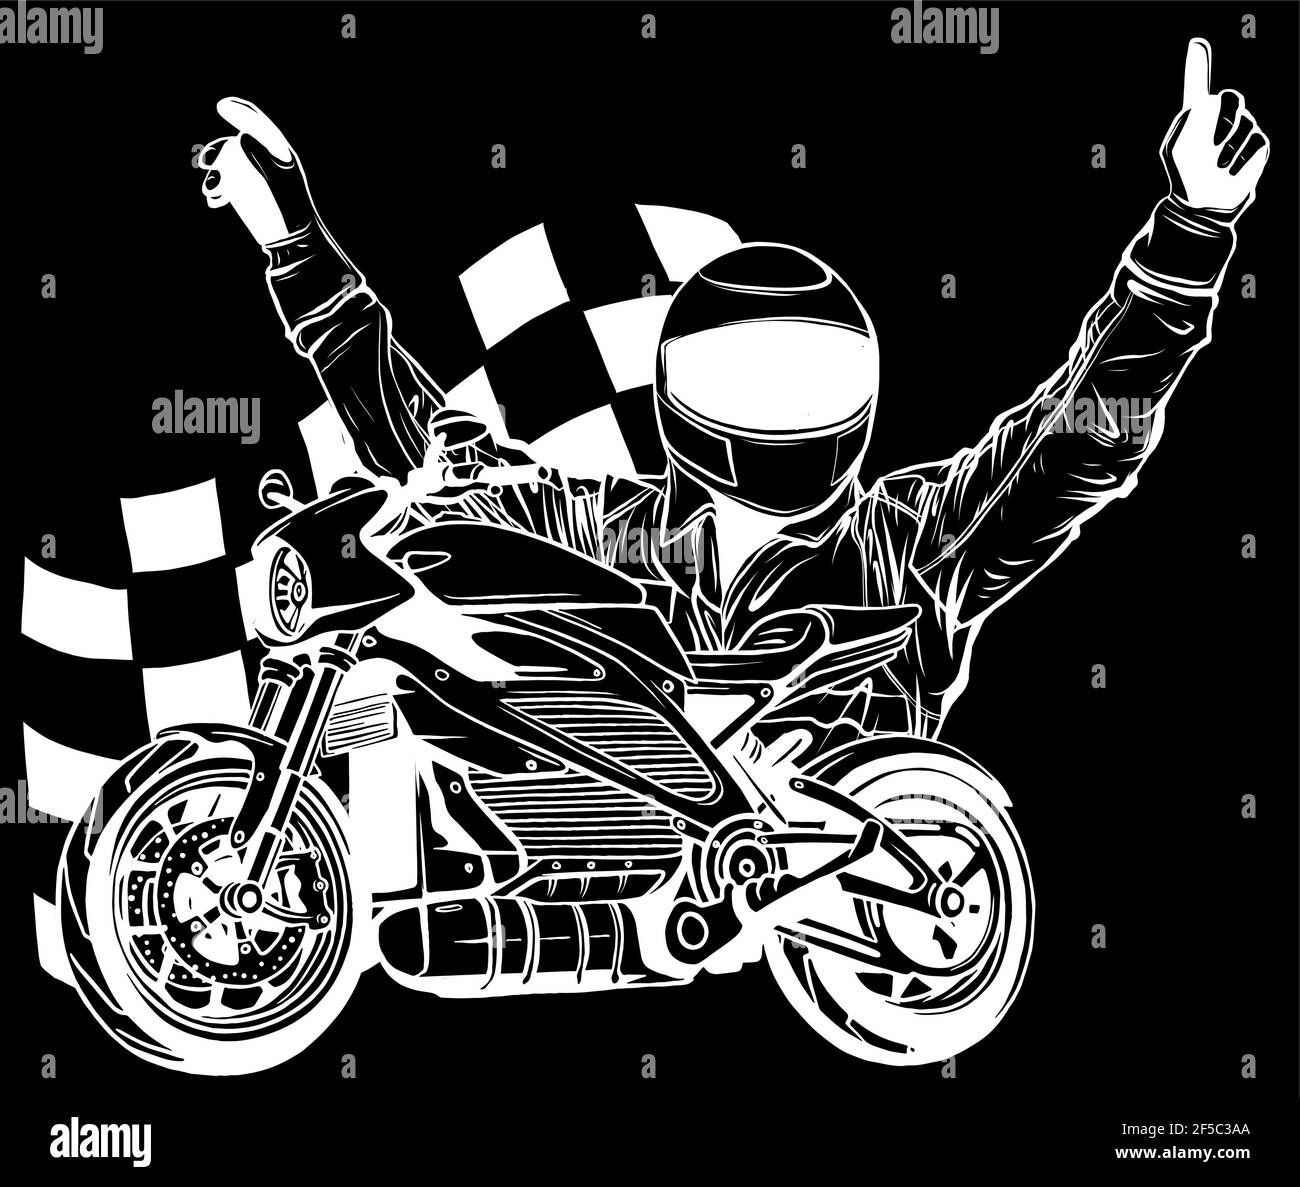 design of Motorbike rider with face flag vector illustration Stock Vector